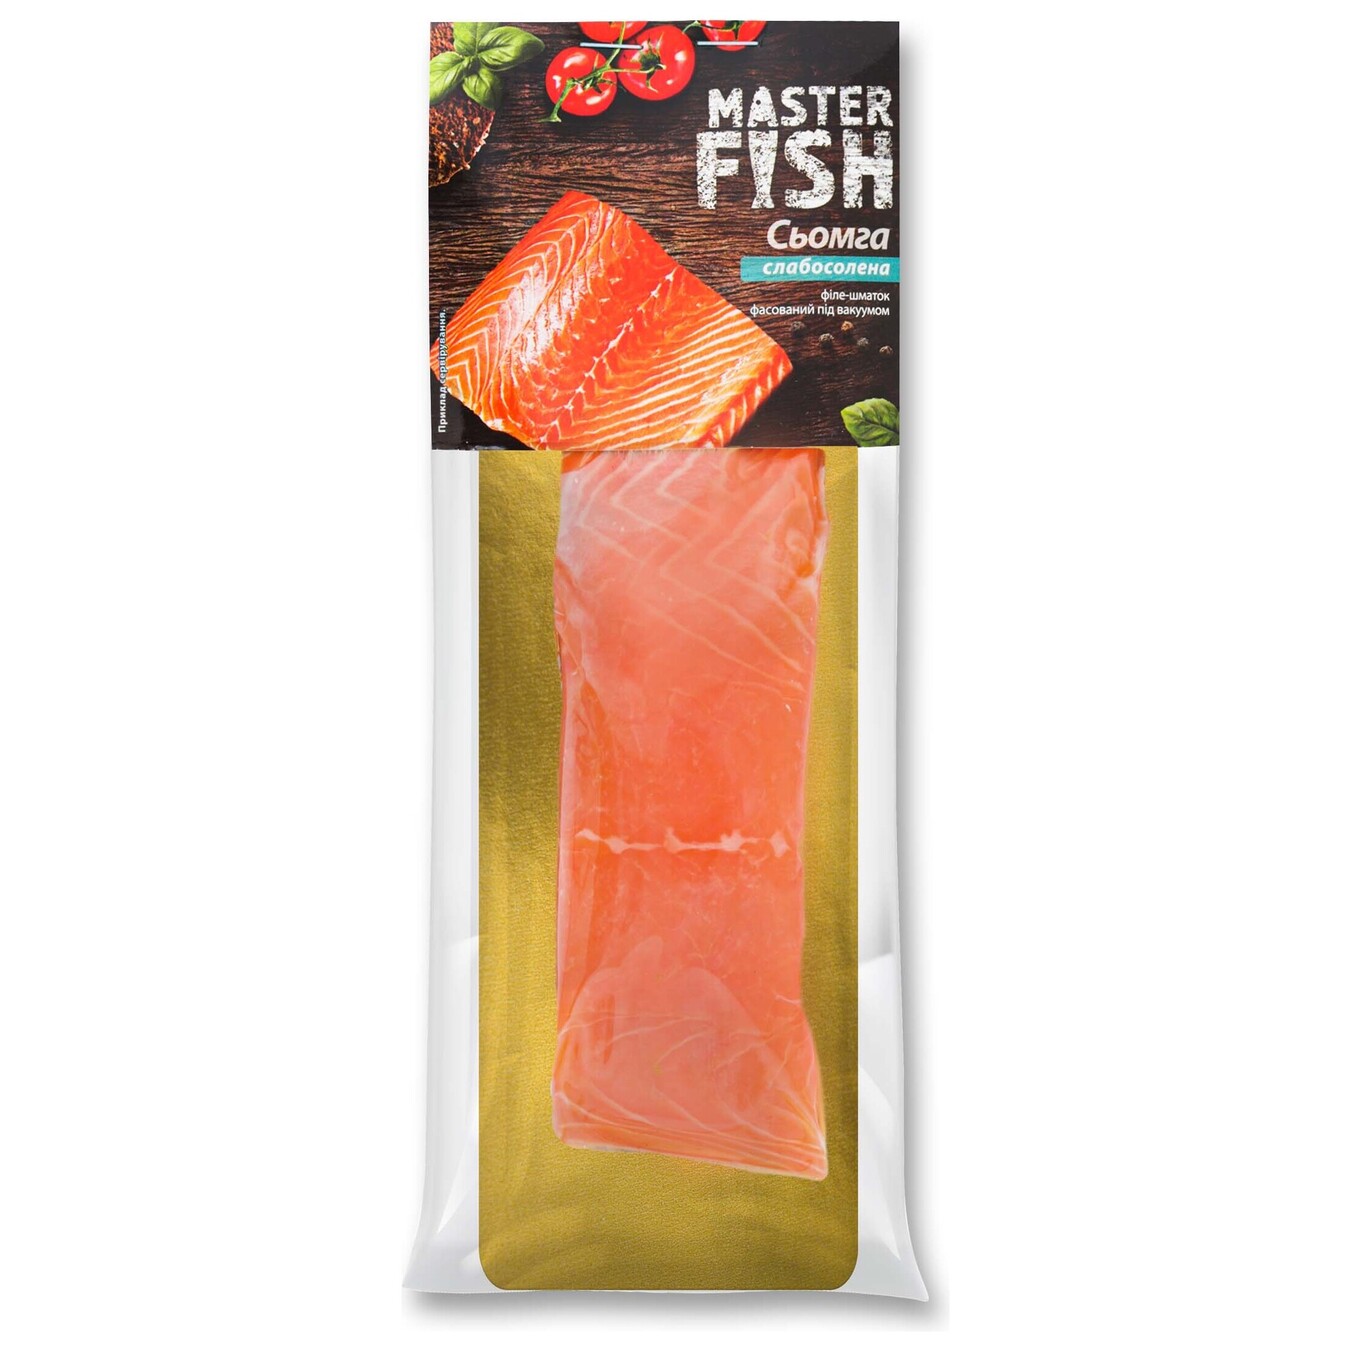 Master Fish Lightly Salted Salmon Fillet Piece 130g